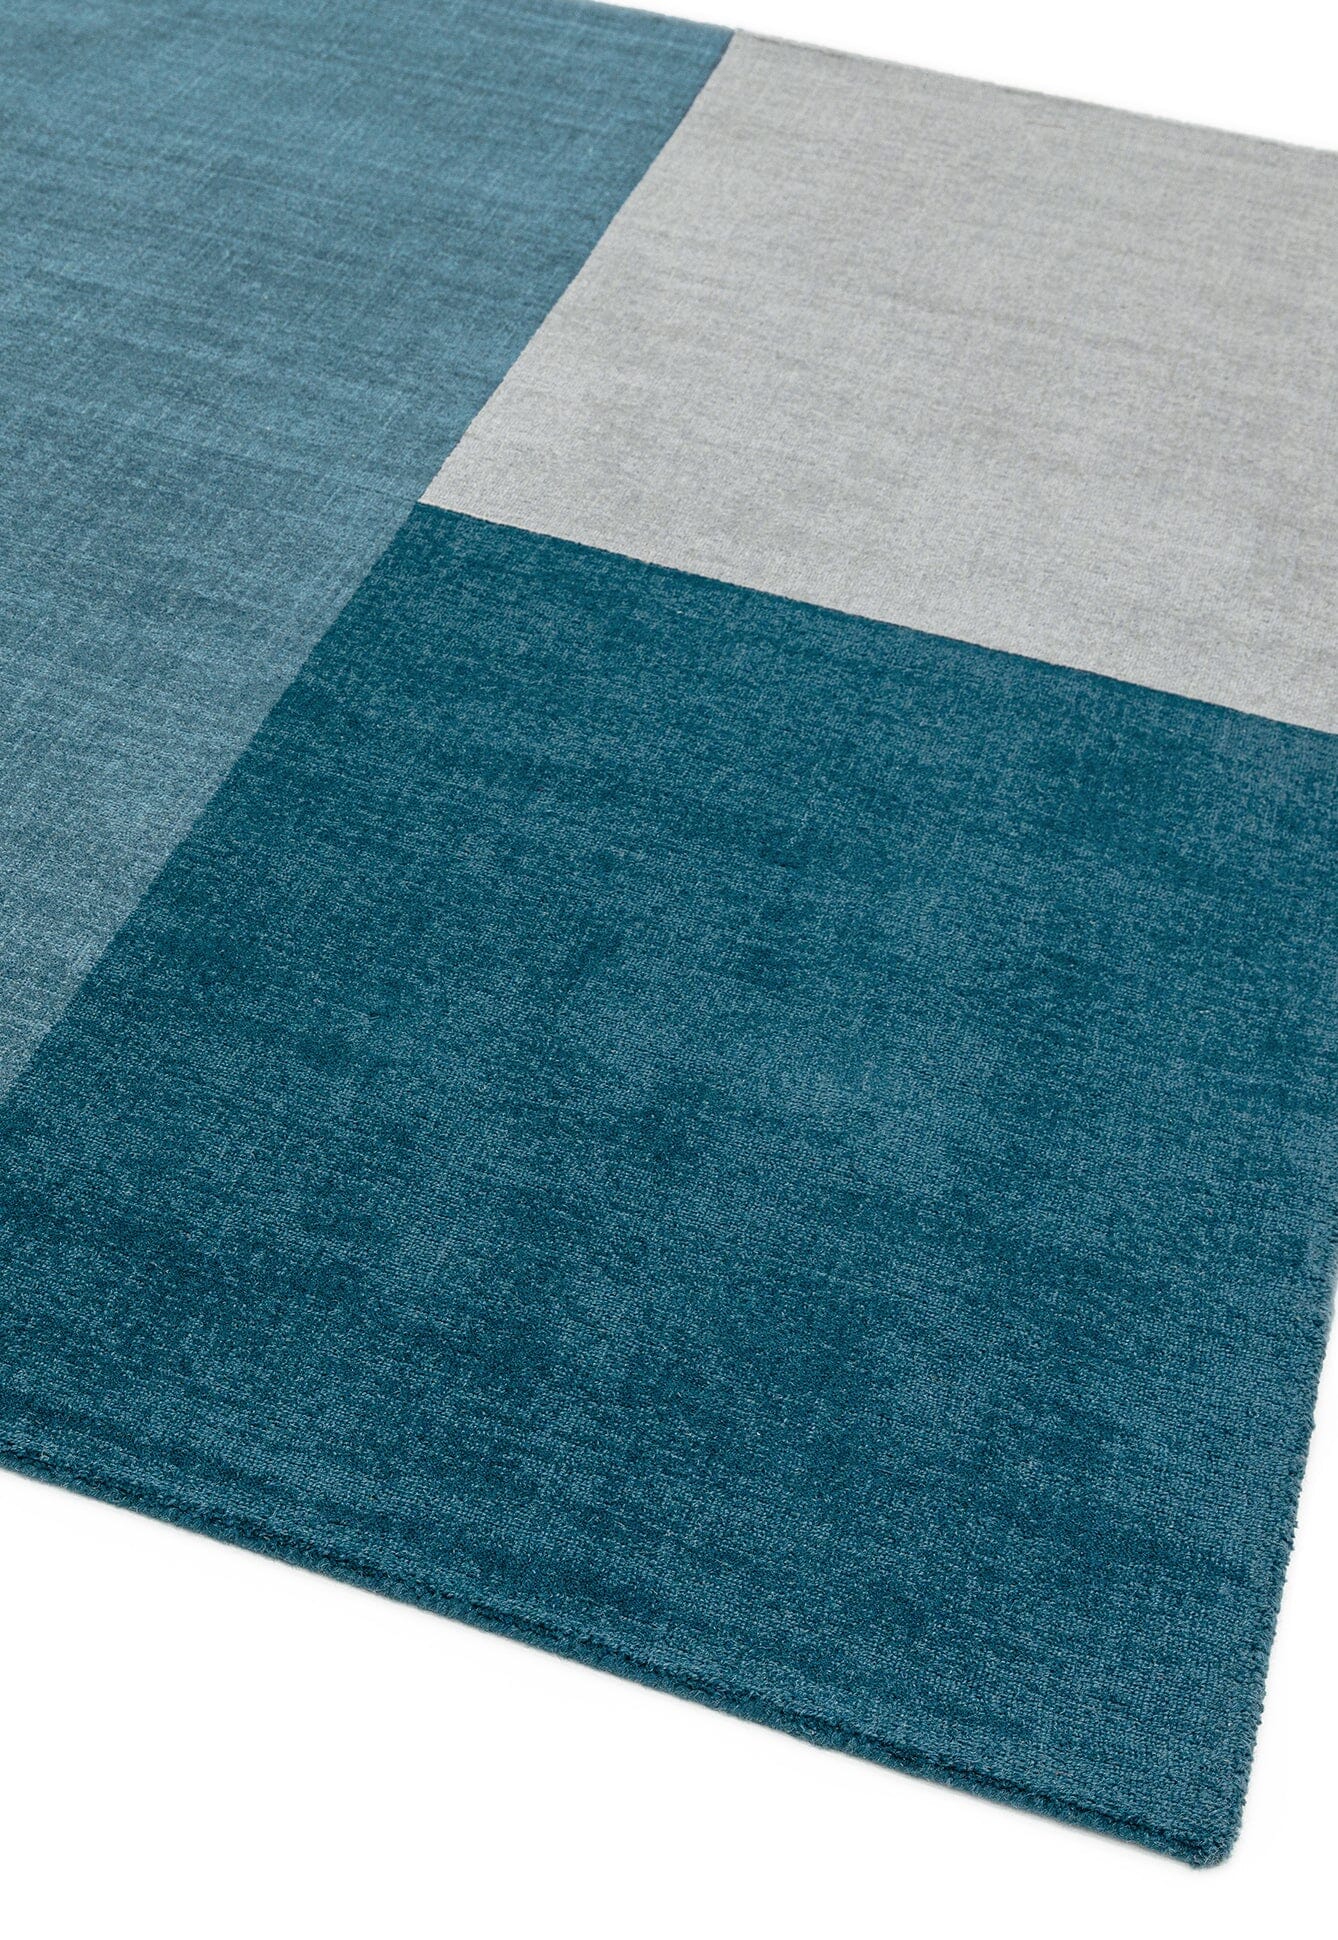  Asiatic Carpets-Asiatic Carpets Blox Hand Woven Rug Teal - 120 x 170cm-Multicoloured 173 